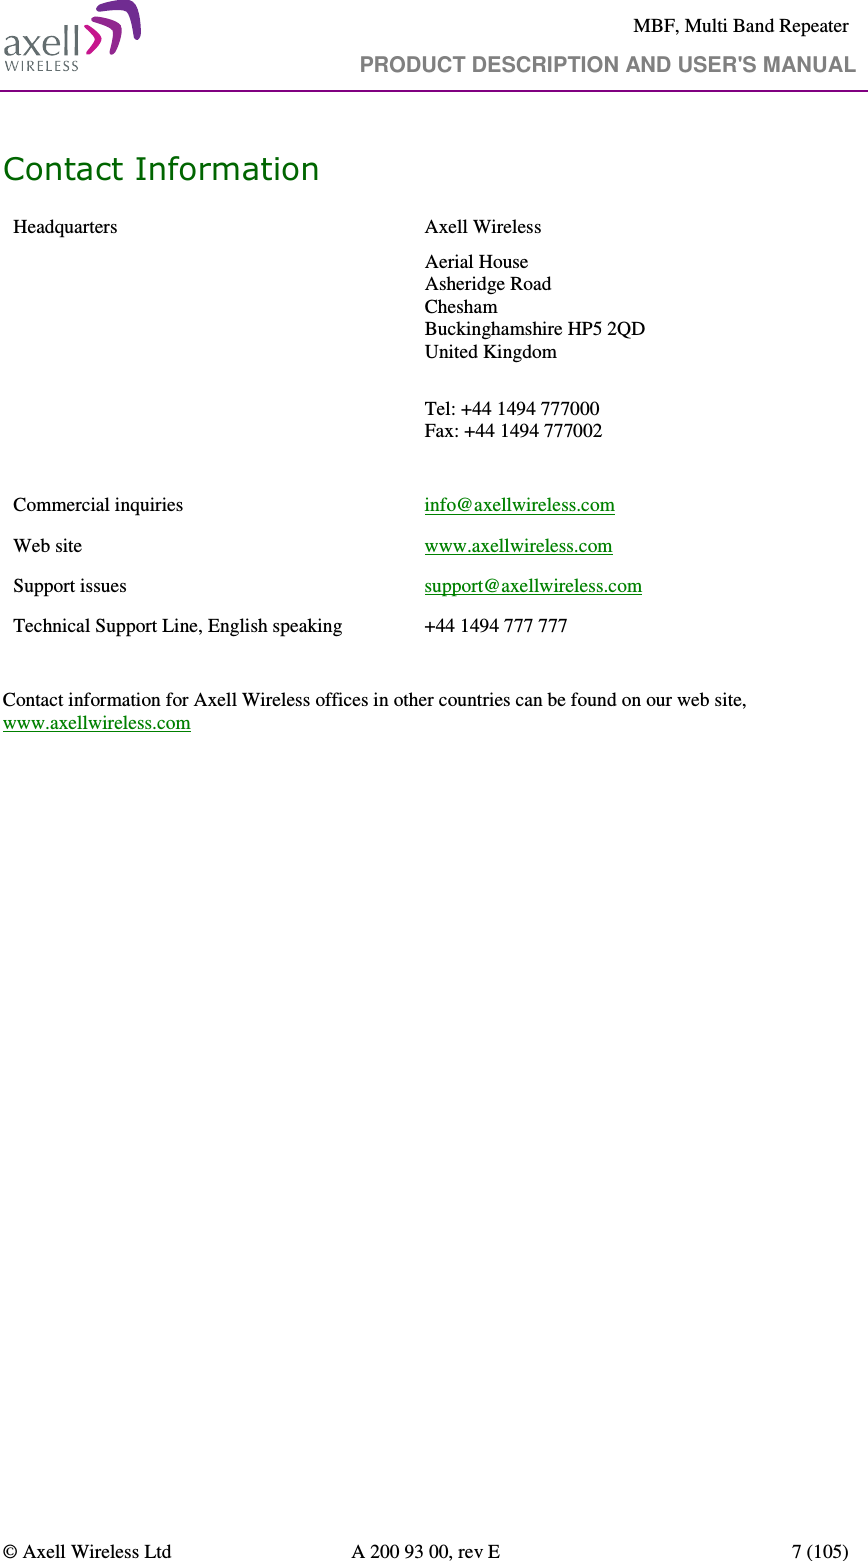     MBF, Multi Band Repeater                                     PRODUCT DESCRIPTION AND USER&apos;S MANUAL   © Axell Wireless Ltd  A 200 93 00, rev E  7 (105)  Contact Information Headquarters  Axell Wireless Aerial House  Asheridge Road  Chesham  Buckinghamshire HP5 2QD  United Kingdom   Tel: +44 1494 777000  Fax: +44 1494 777002   Commercial inquiries  info@axellwireless.com Web site  www.axellwireless.com Support issues  support@axellwireless.com Technical Support Line, English speaking  +44 1494 777 777  Contact information for Axell Wireless offices in other countries can be found on our web site, www.axellwireless.com 